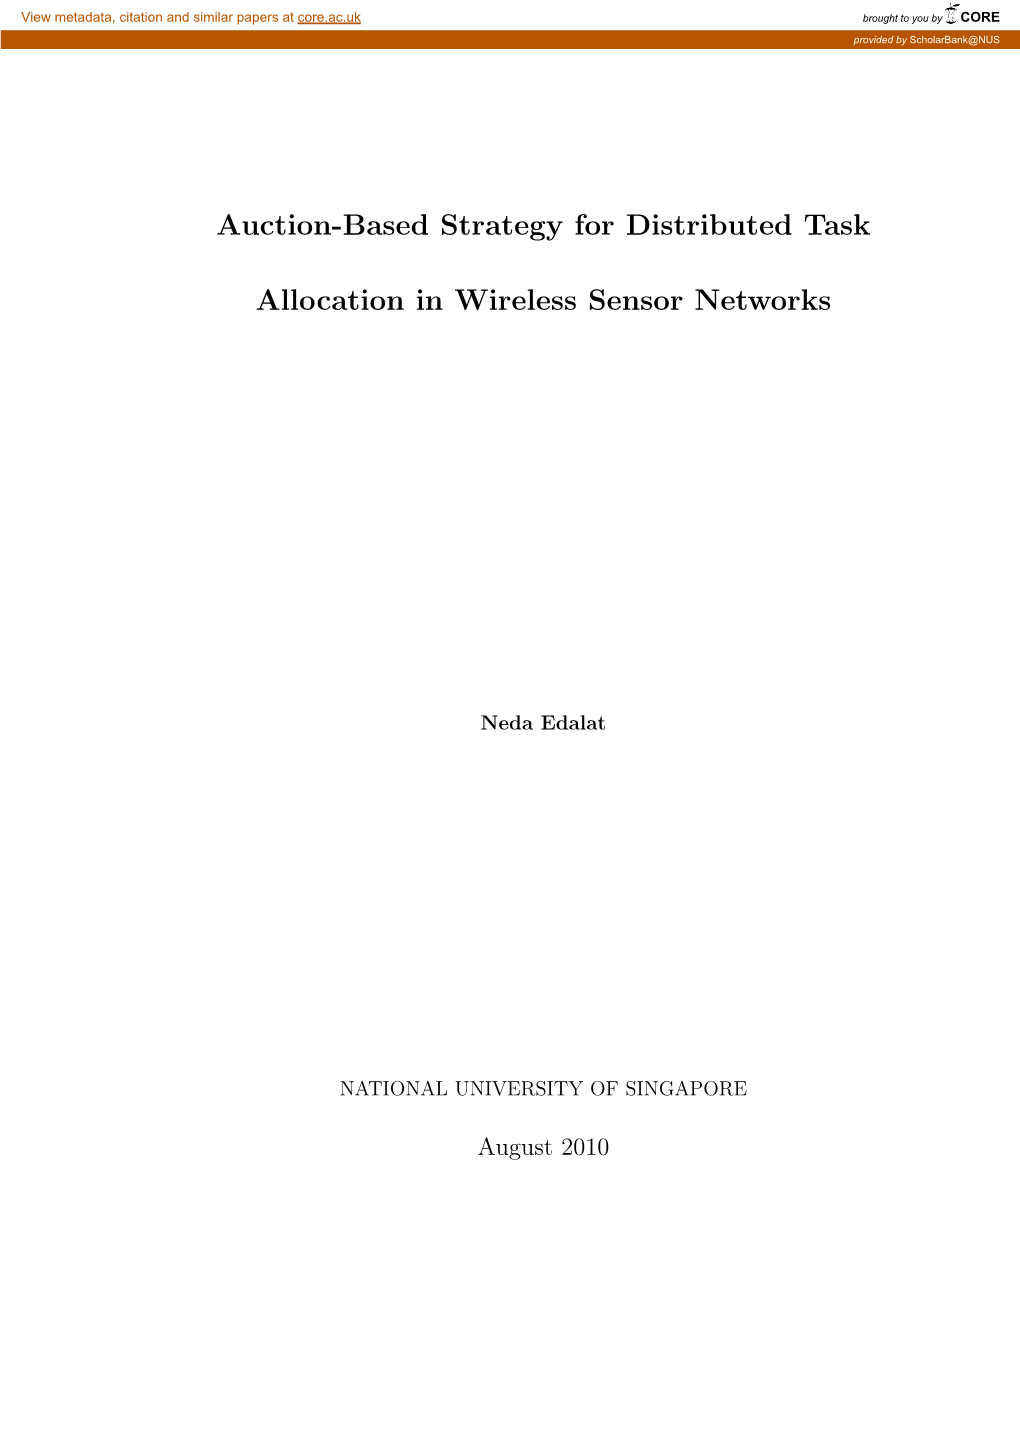 Auction-Based Strategy for Distributed Task Allocation in Wireless Sensor Networks